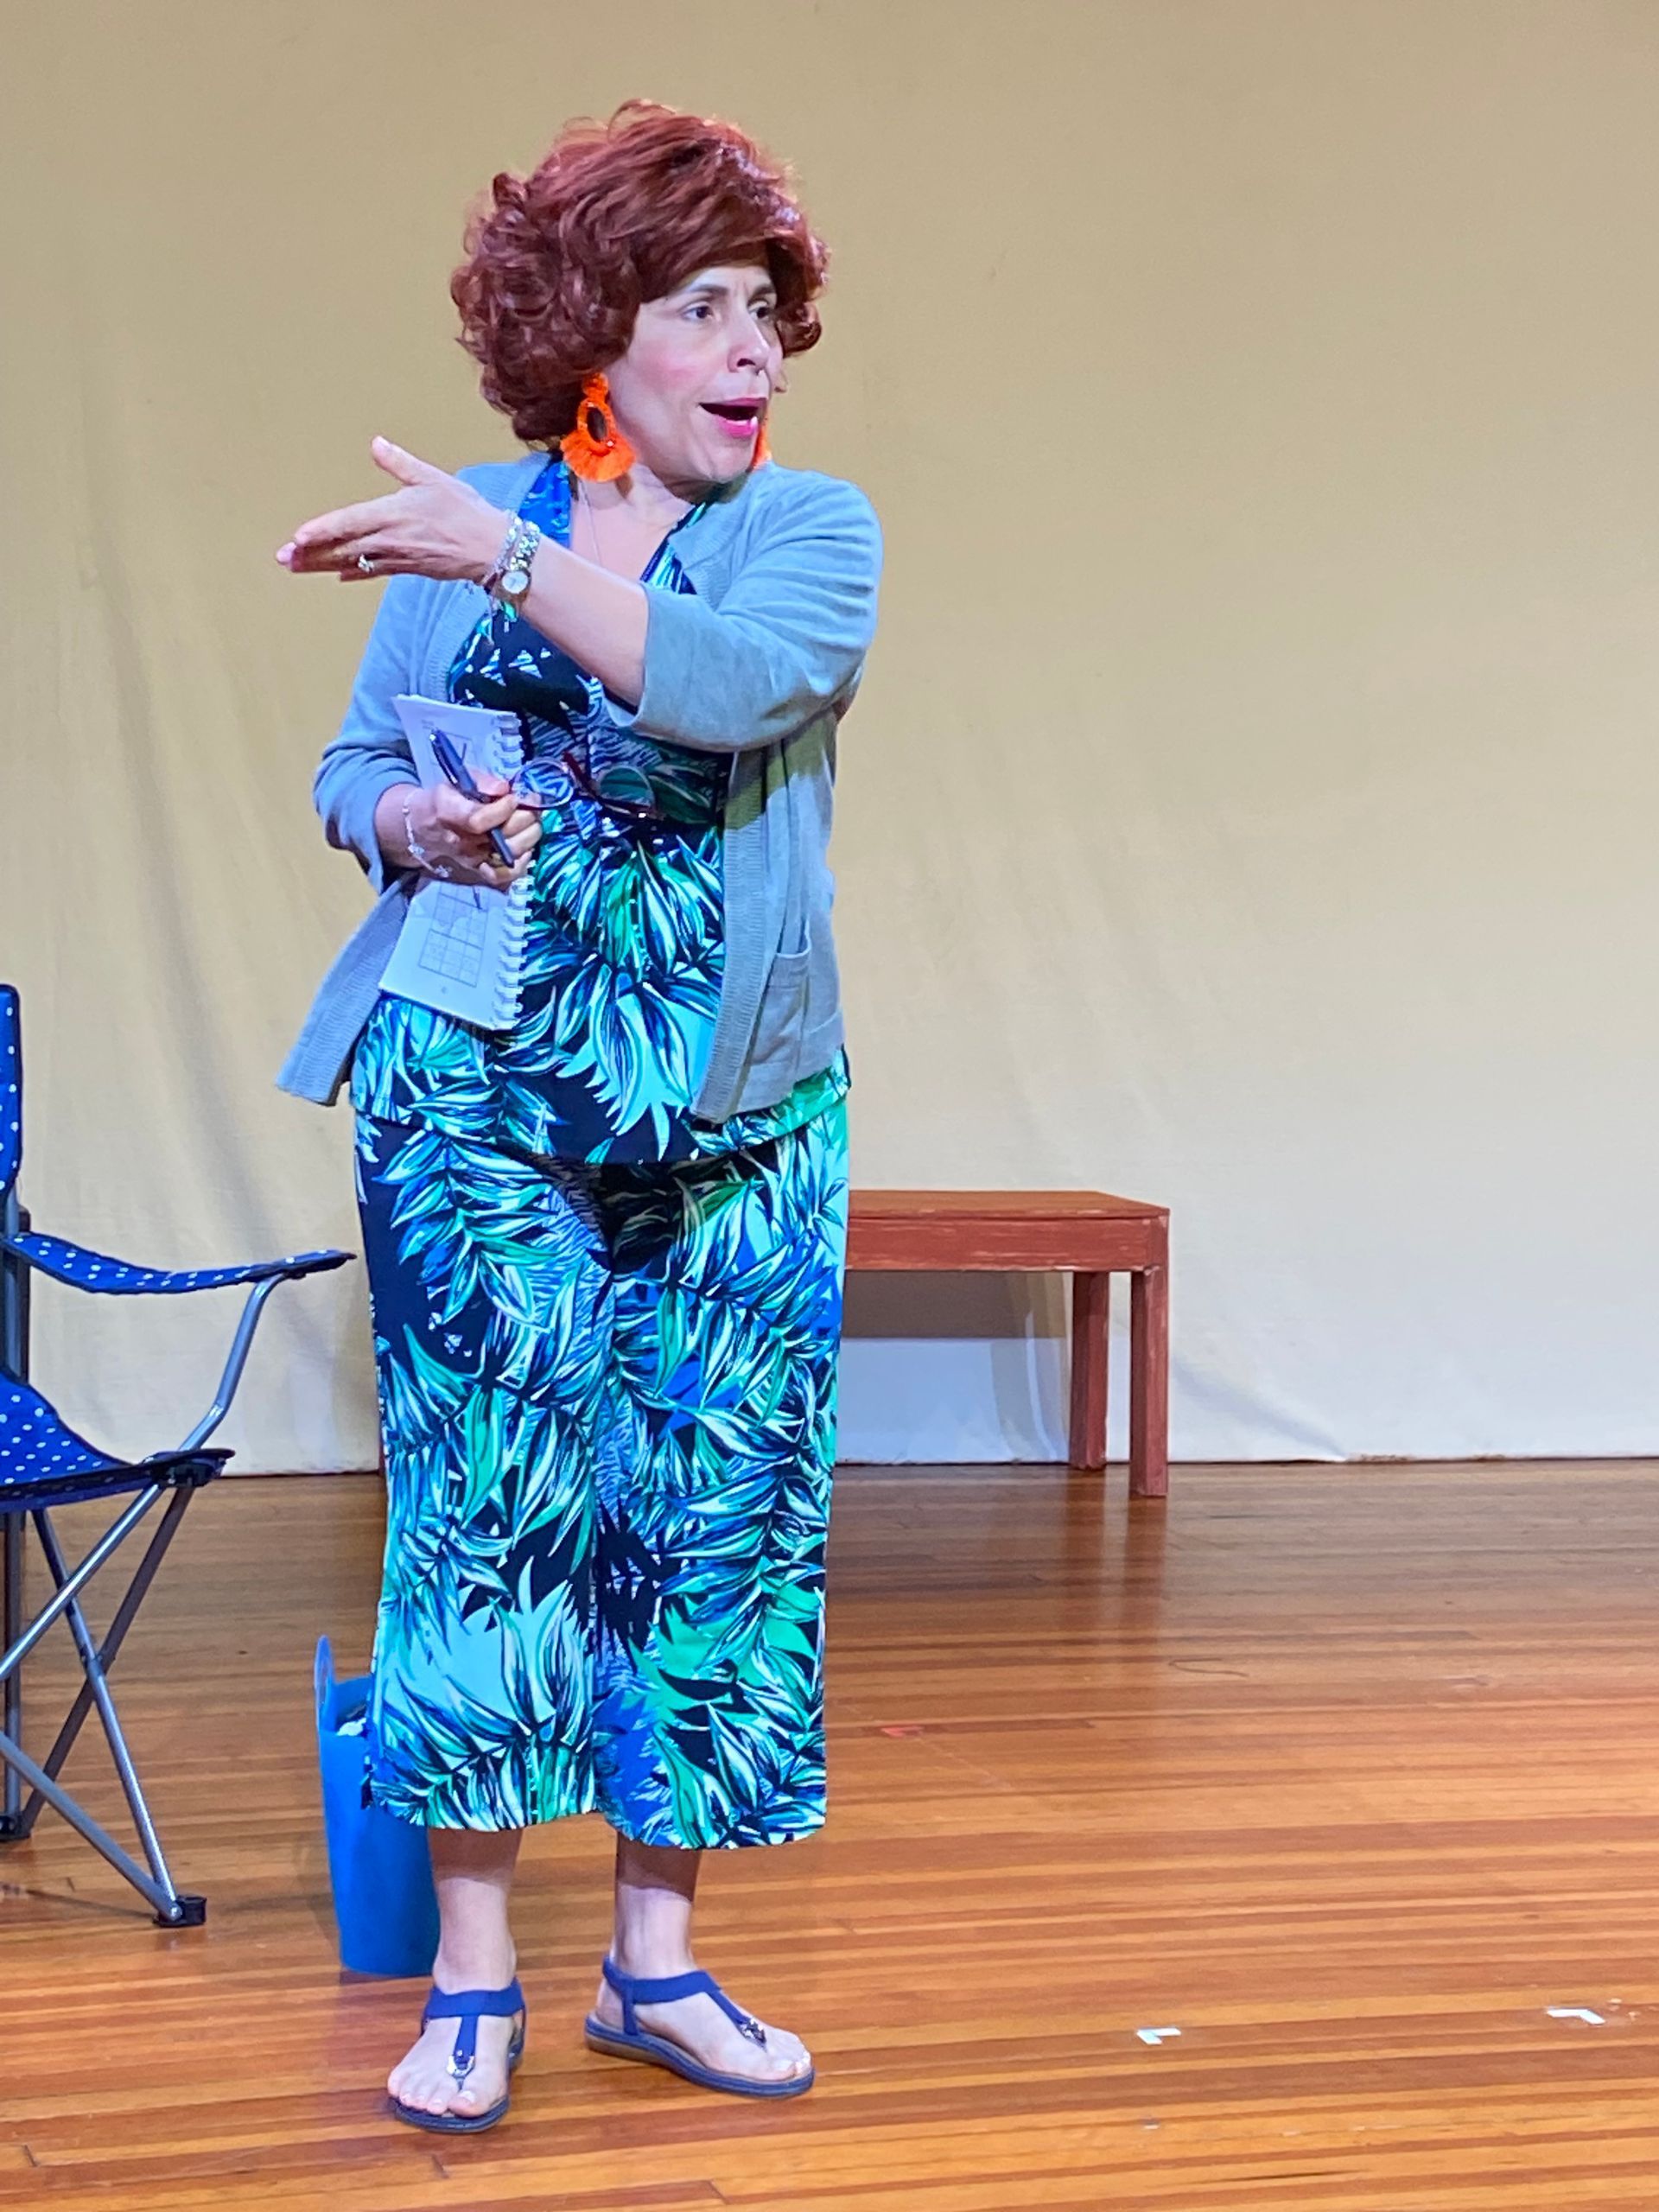 A male actor dressed as a women in a wig and tropical dress